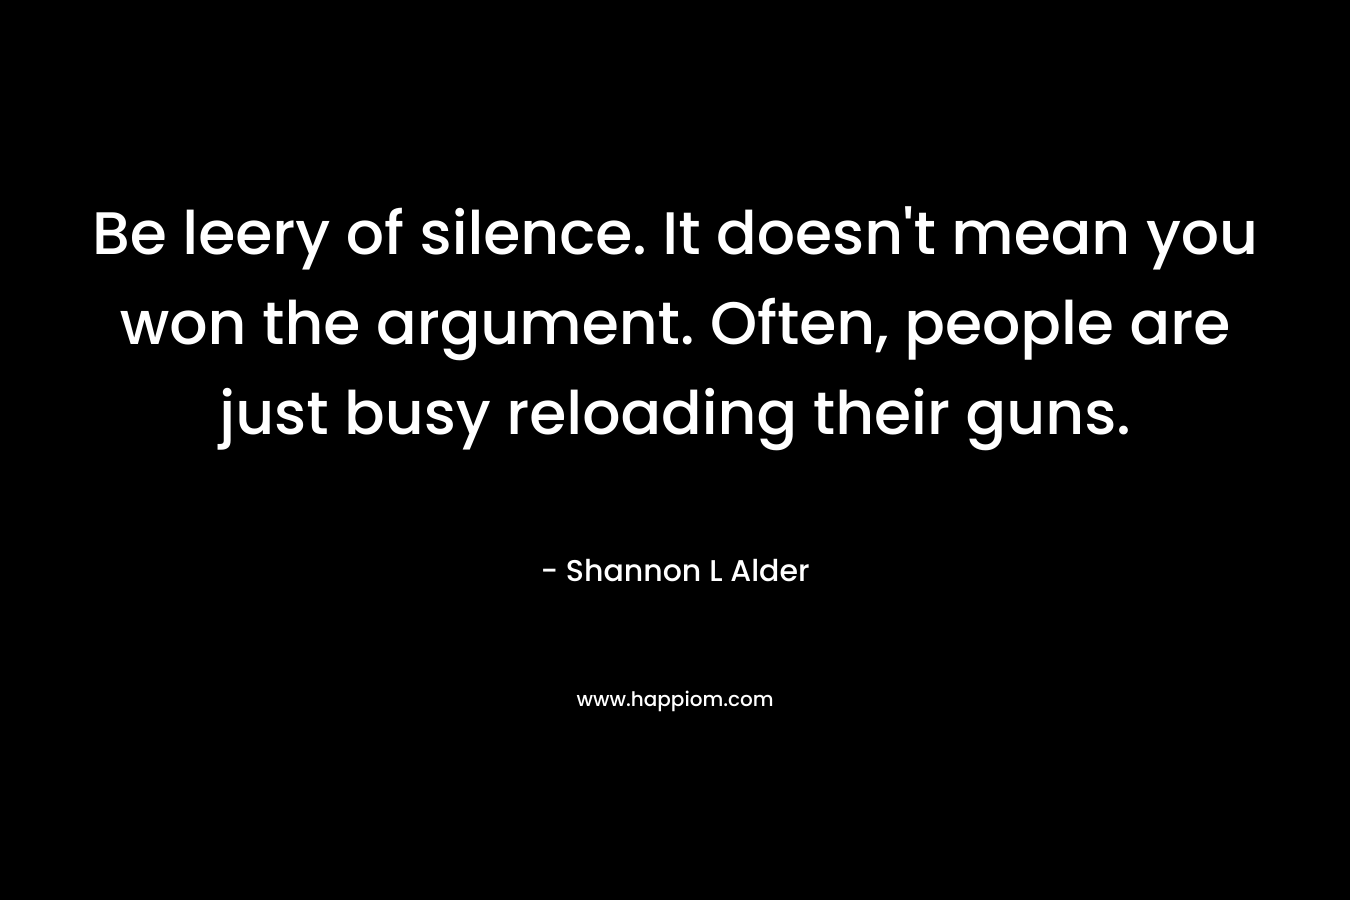 Be leery of silence. It doesn't mean you won the argument. Often, people are just busy reloading their guns.